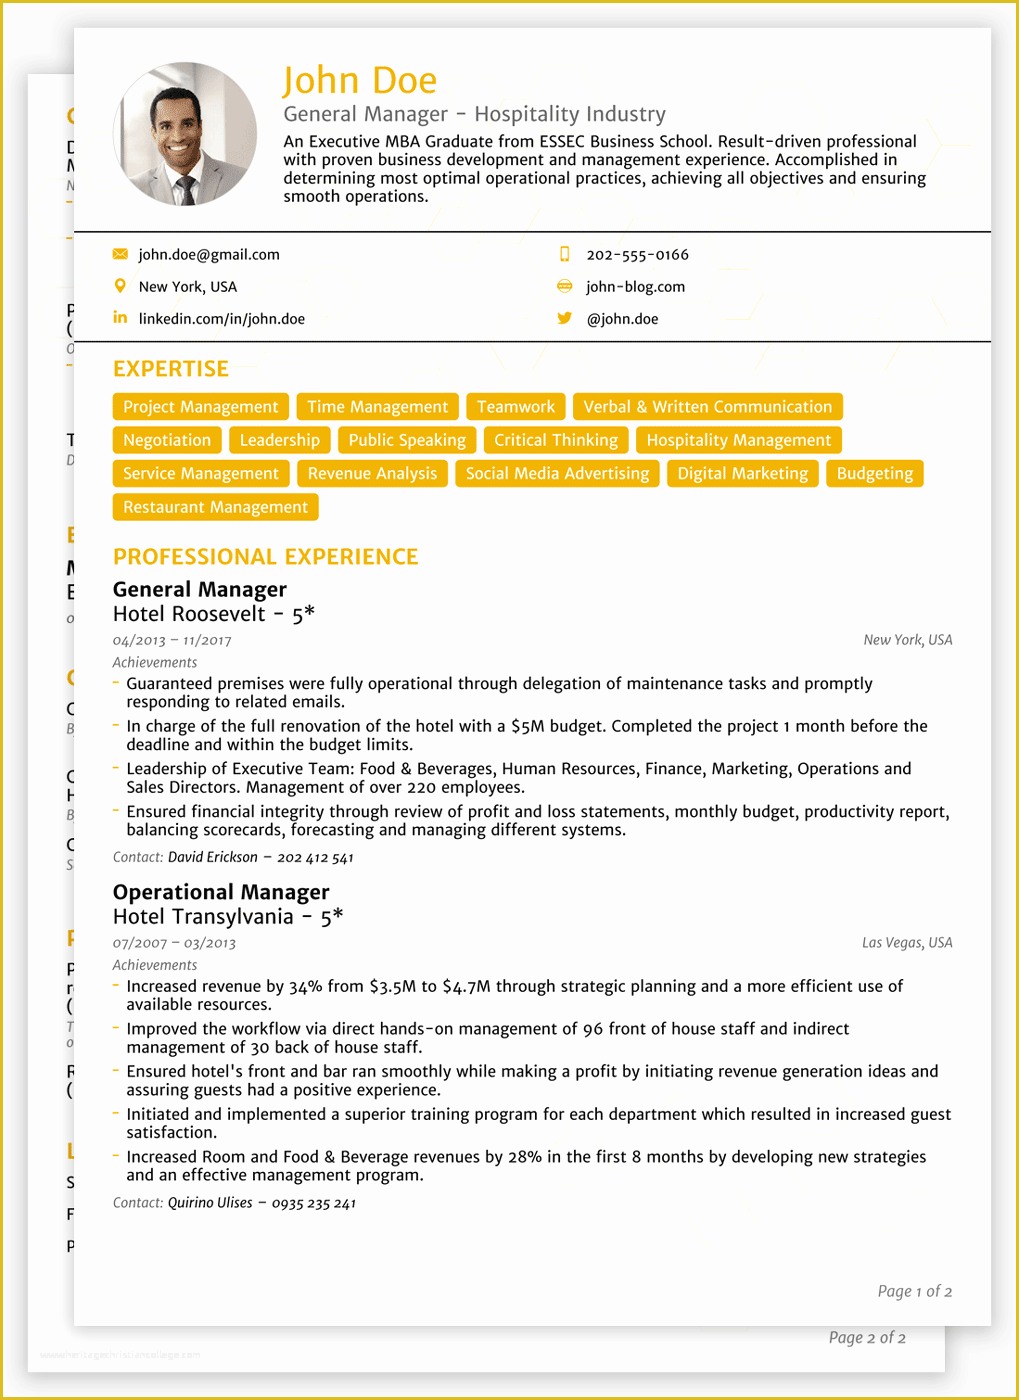 Curriculum Vitae Template Free Of 2018 Cv Templates [download] Create Yours In 5 Minutes